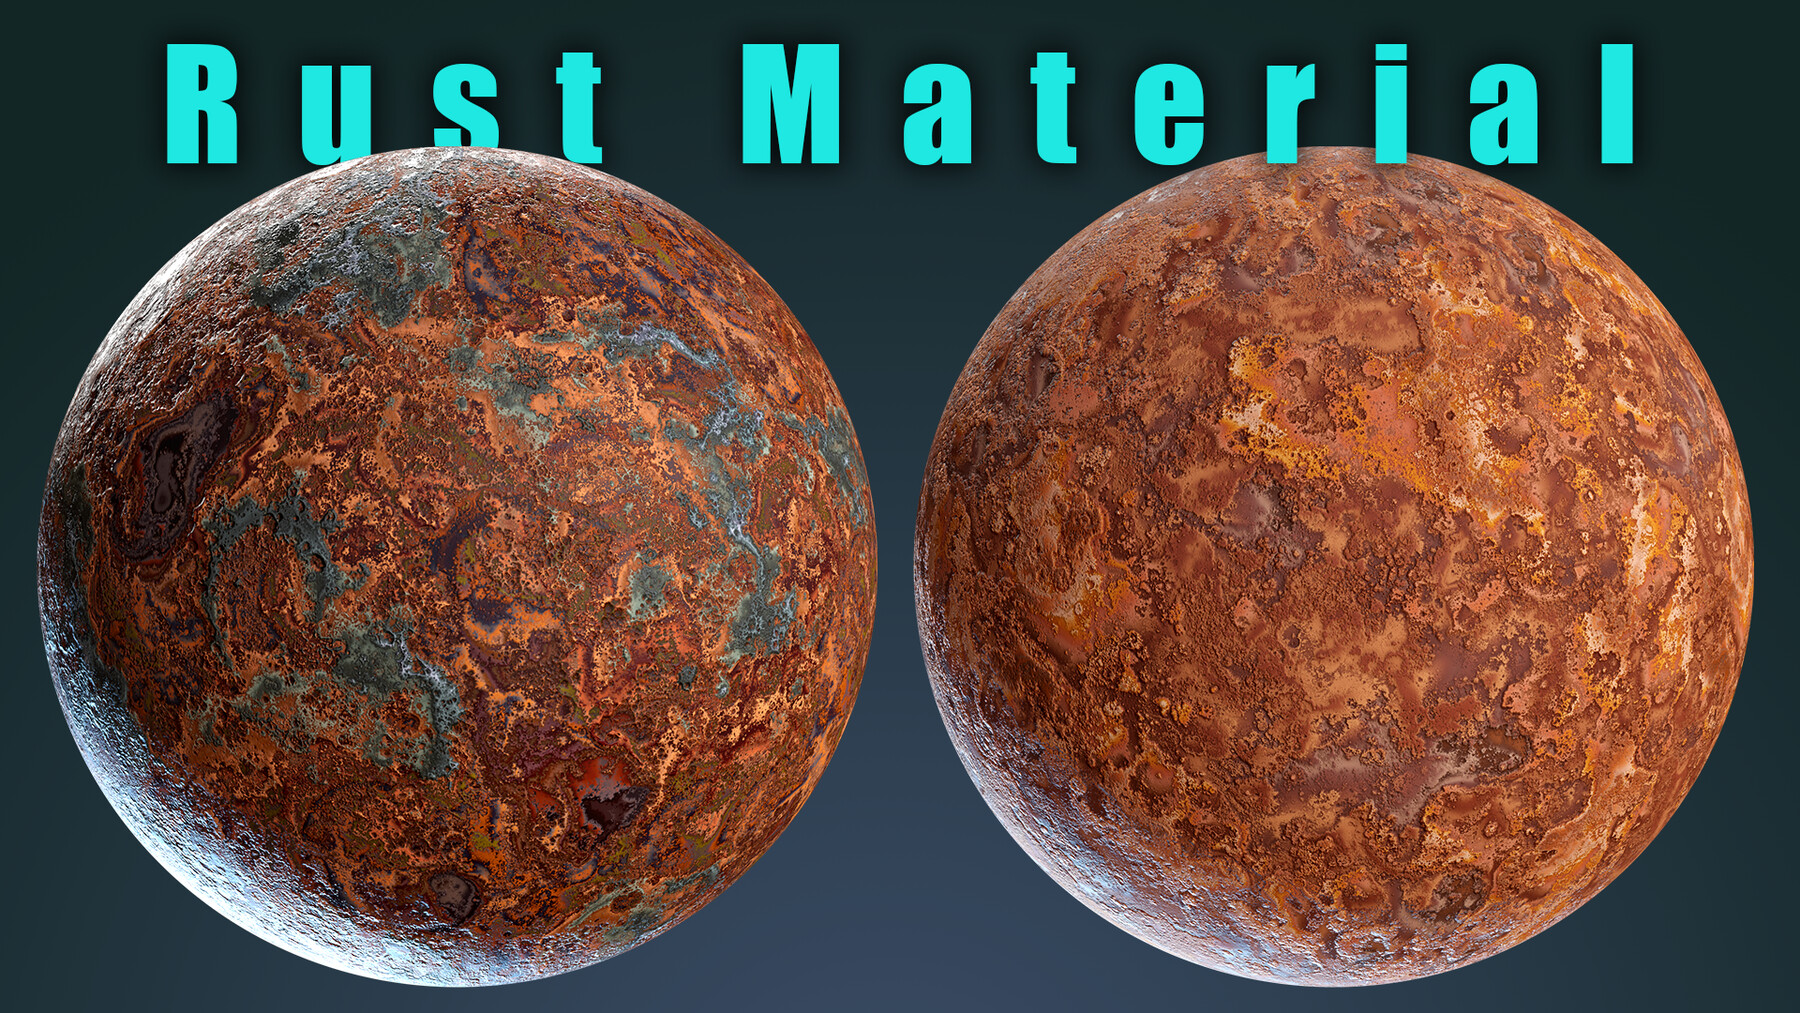 ArtStation - Rust Material for Substance Painter | Resources